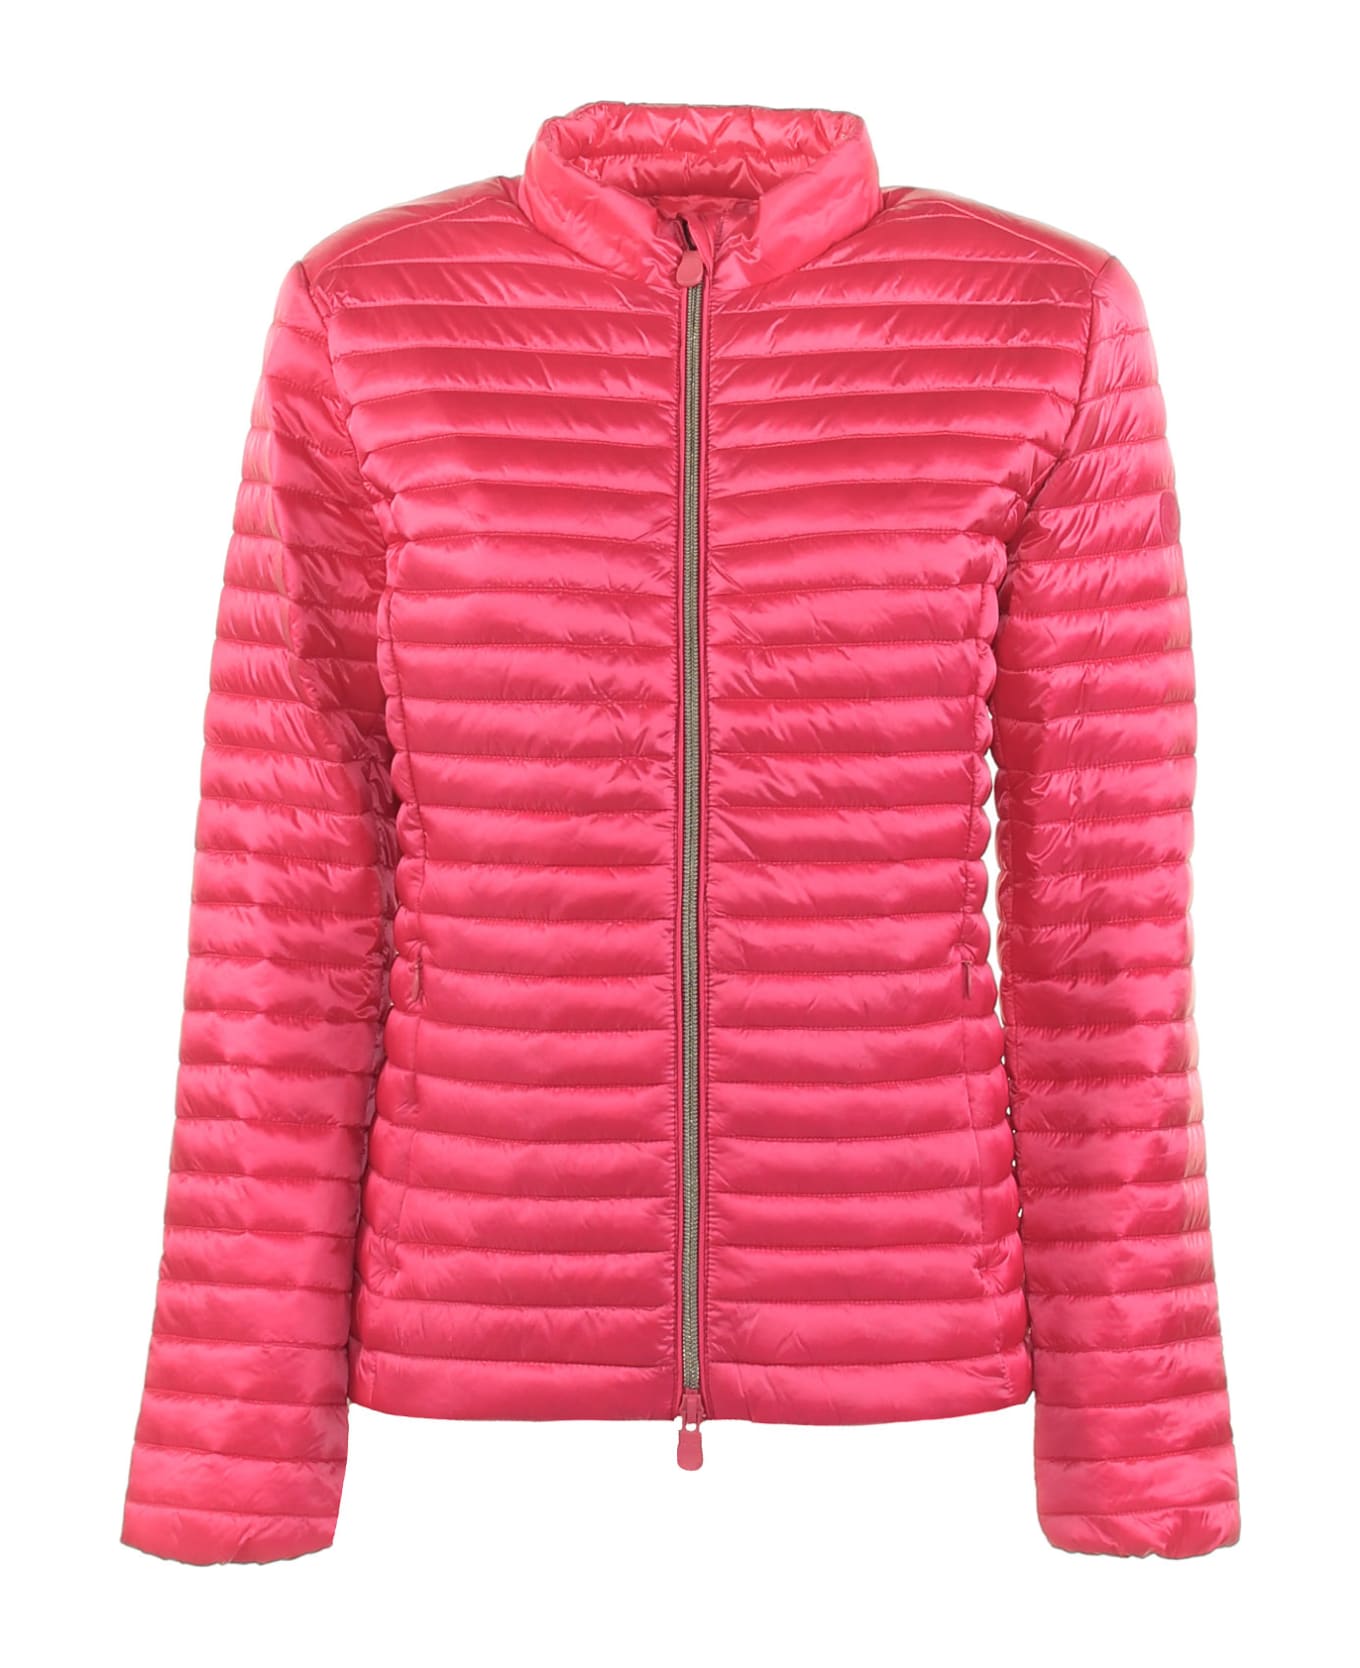 Save the Duck Pearly Pink Quilted Jacket - PINK ダウンジャケット